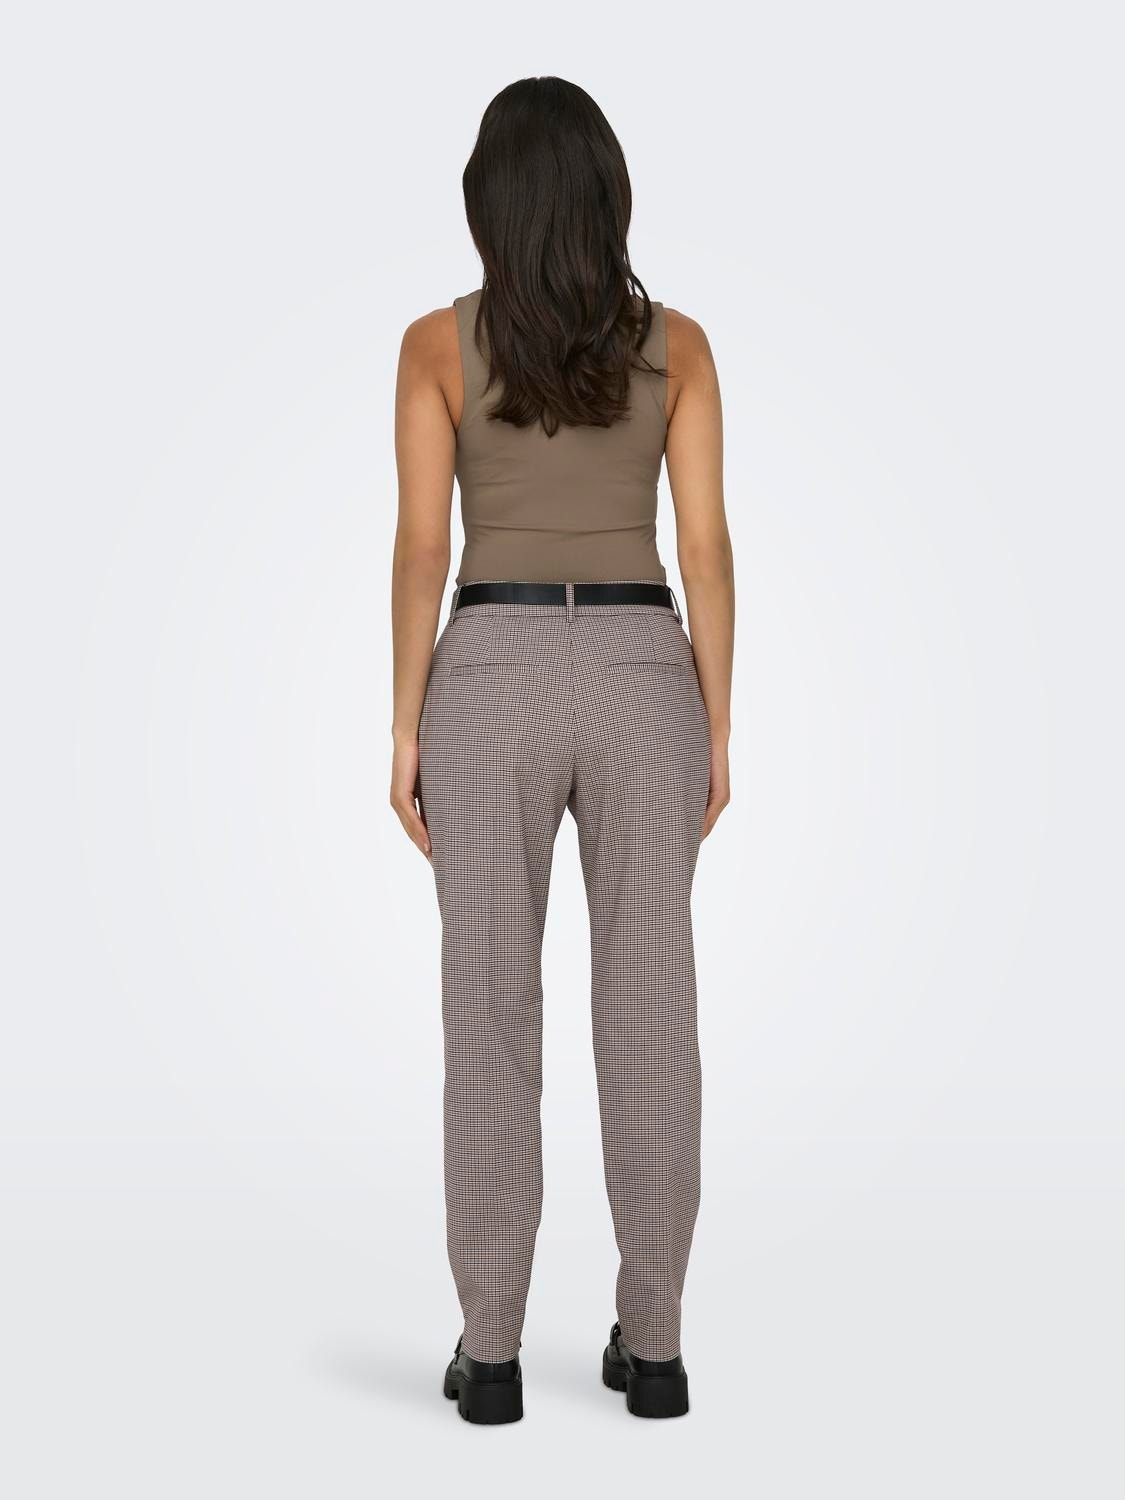 ONLY Normal geschnitten Hohe Taille Hose -Pumice Stone - 15313686